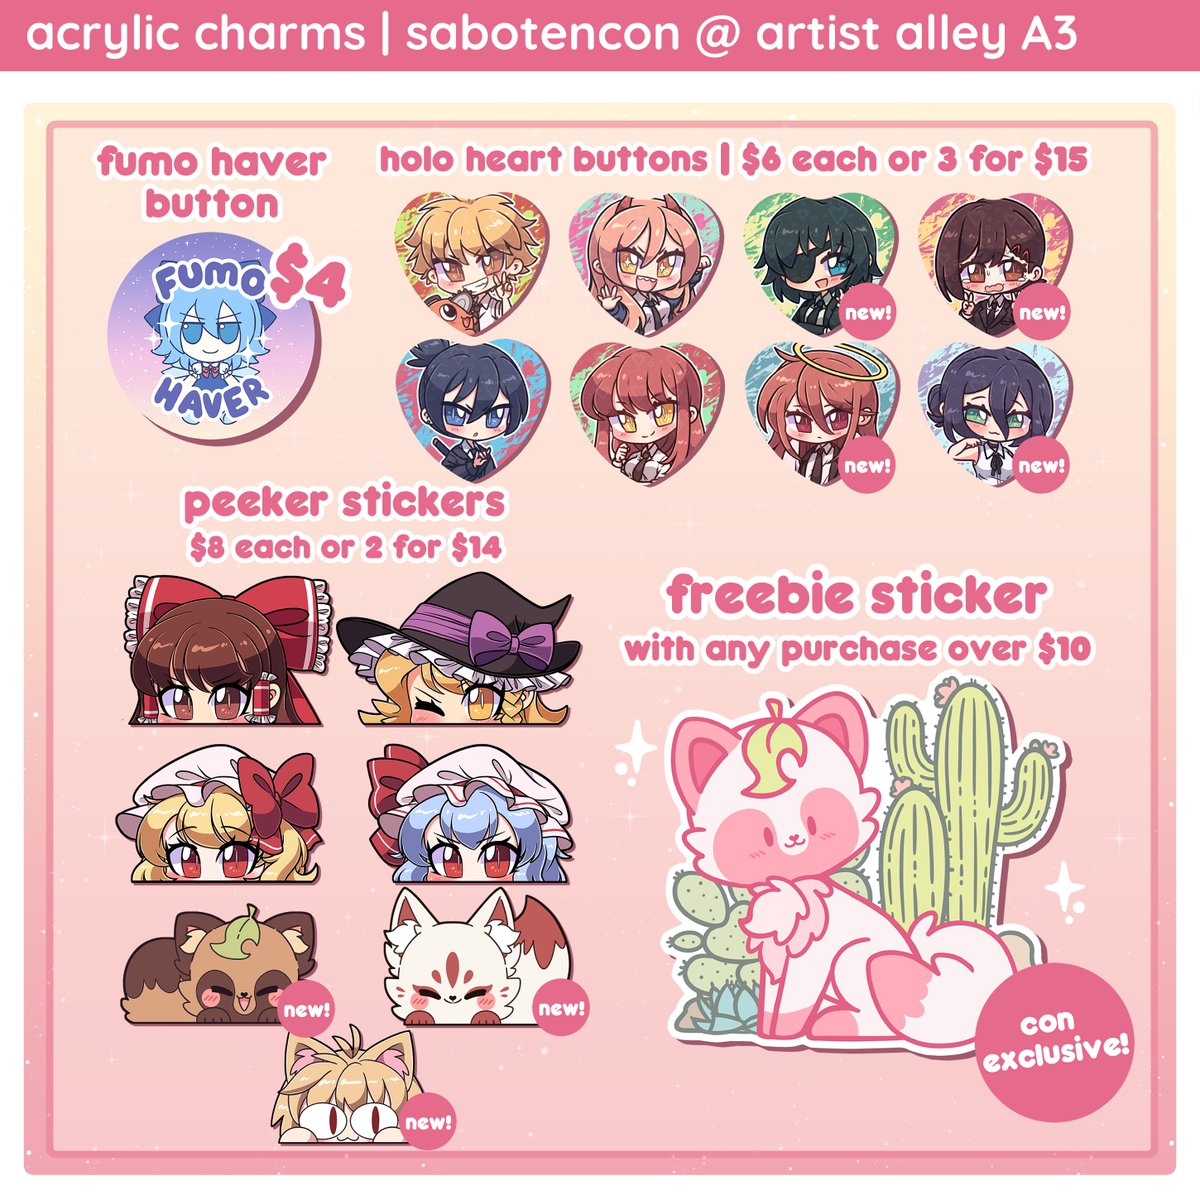 lots of new stuff will be debuting, and ill even be bringing gachapon machines! even if you can't come, you can use this catalog as a lil sneak peek for things to come in future store updates 🫶 